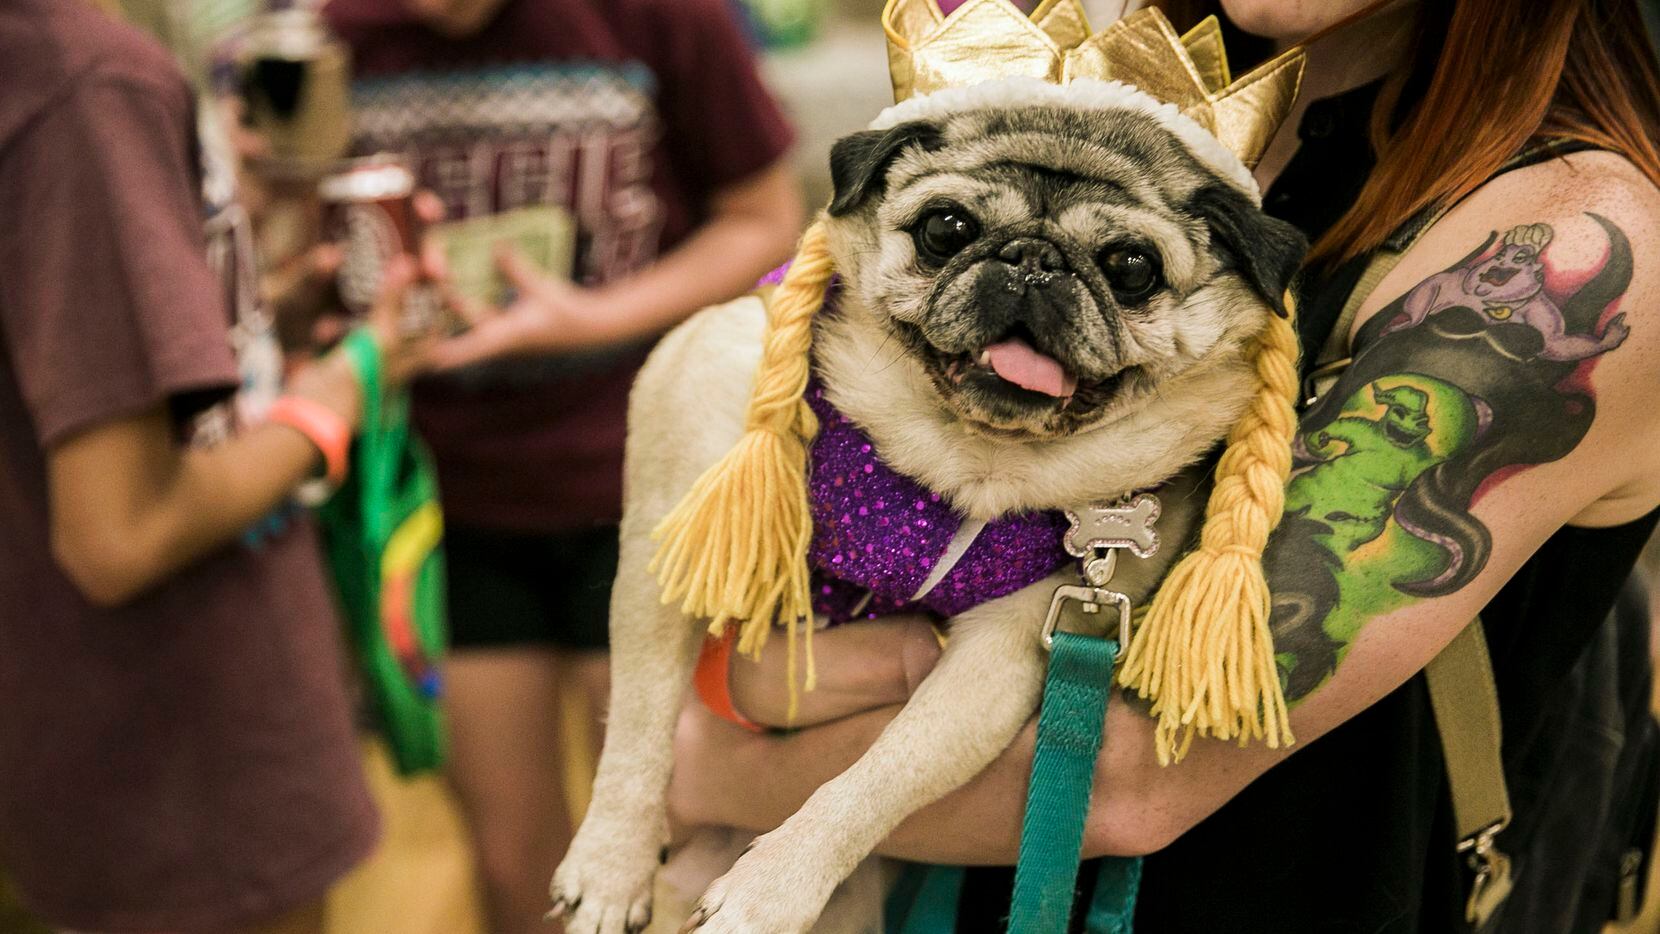 Febee, dressed as Rapunzel, was held by owner Katrina Kinne of Dallas at last year's Pug-O-Ween at the Grapevine Convention Center. (Daniel Carde/The Dallas Morning News)